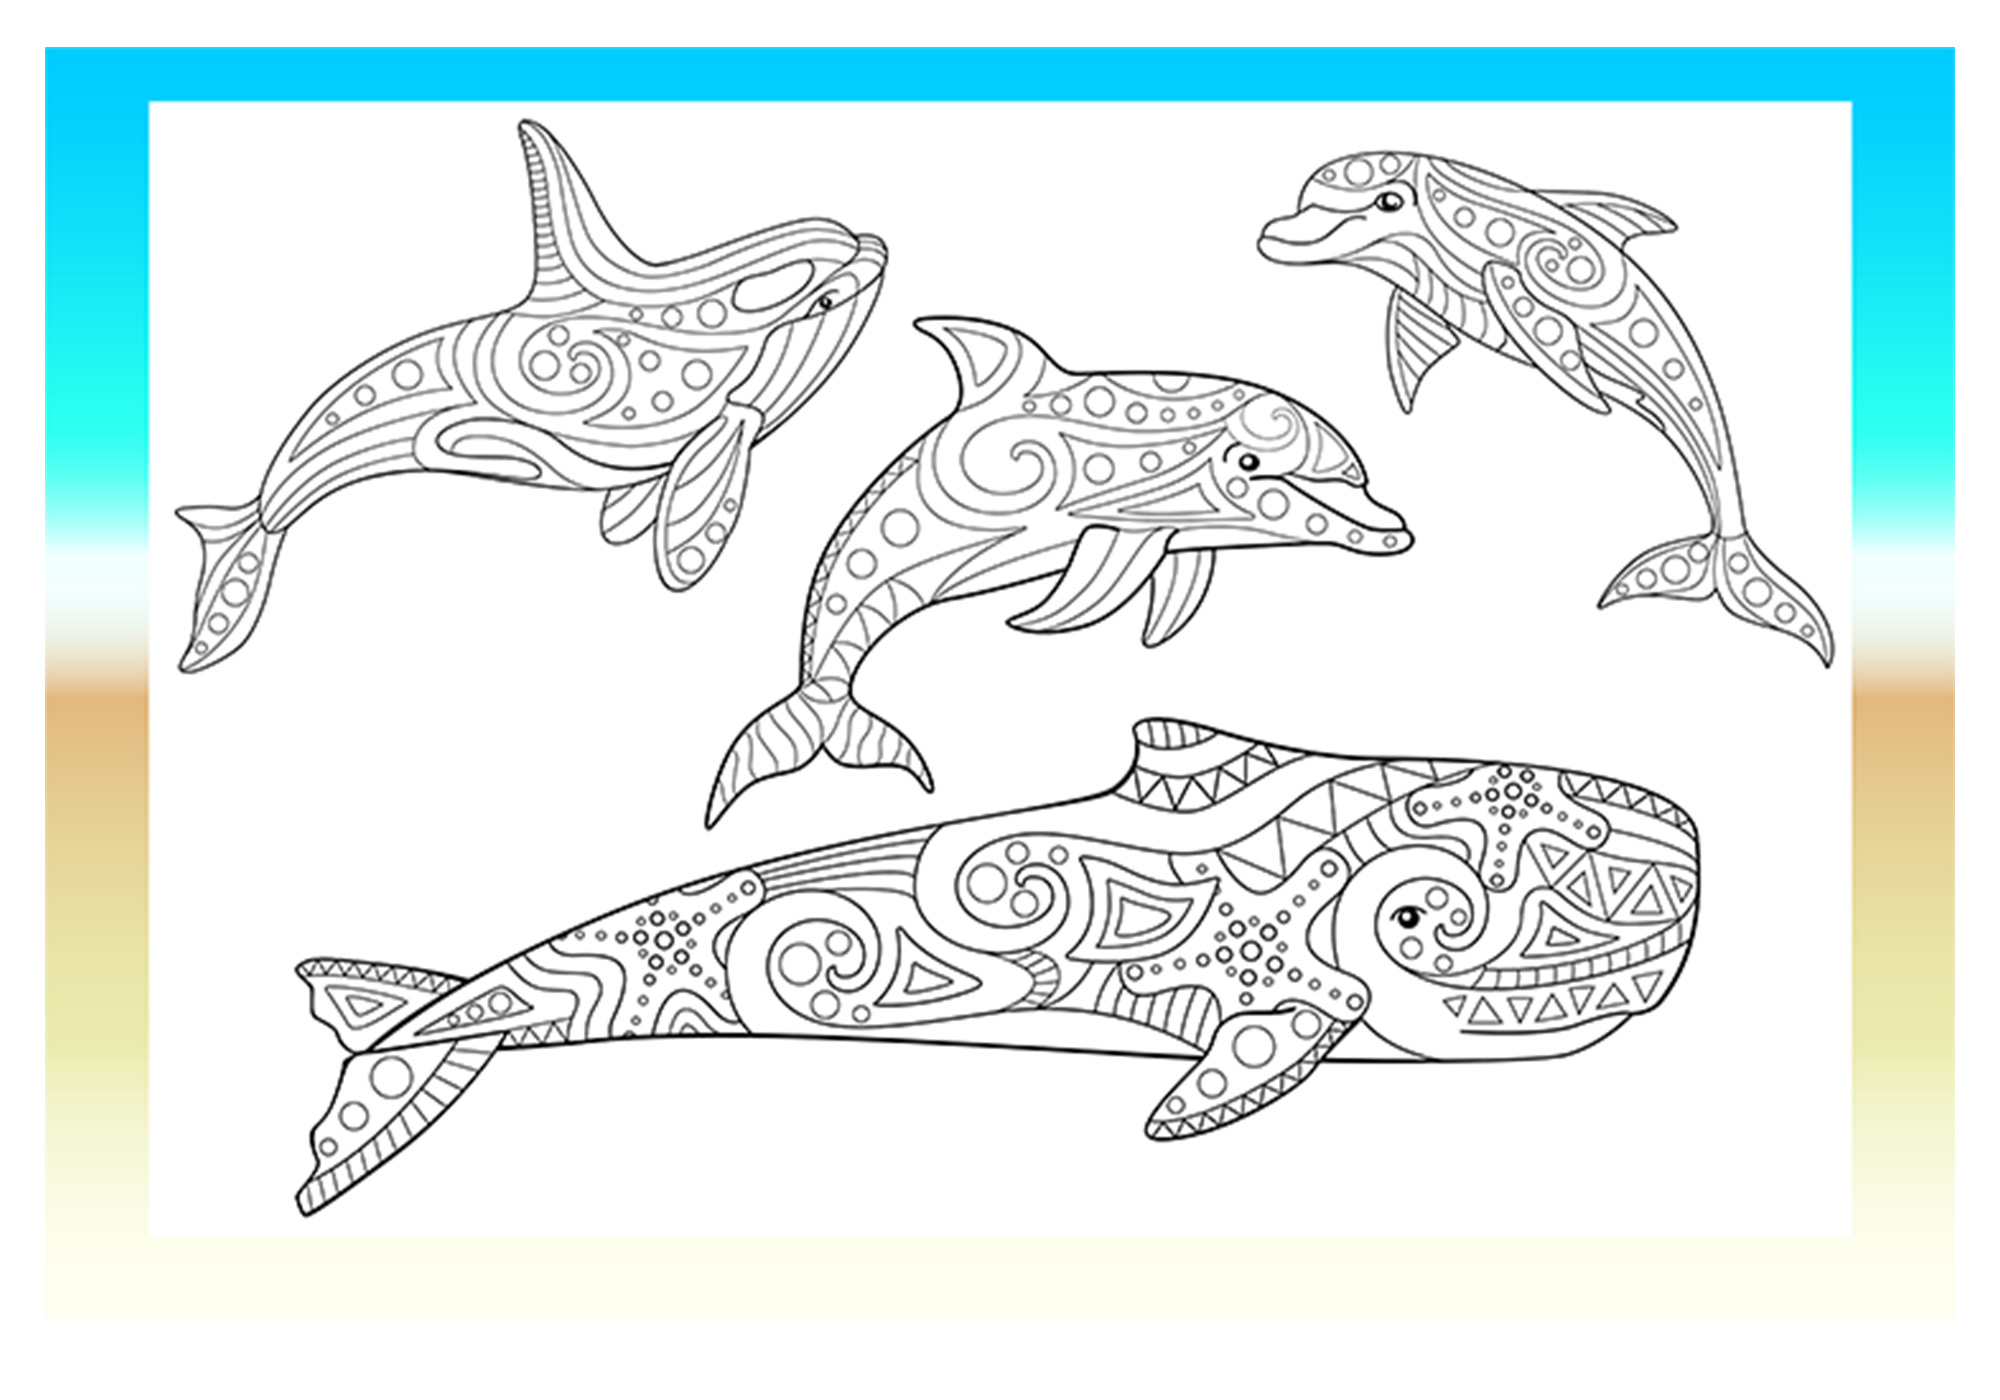 Coloring page with three dolphins in the ocean.